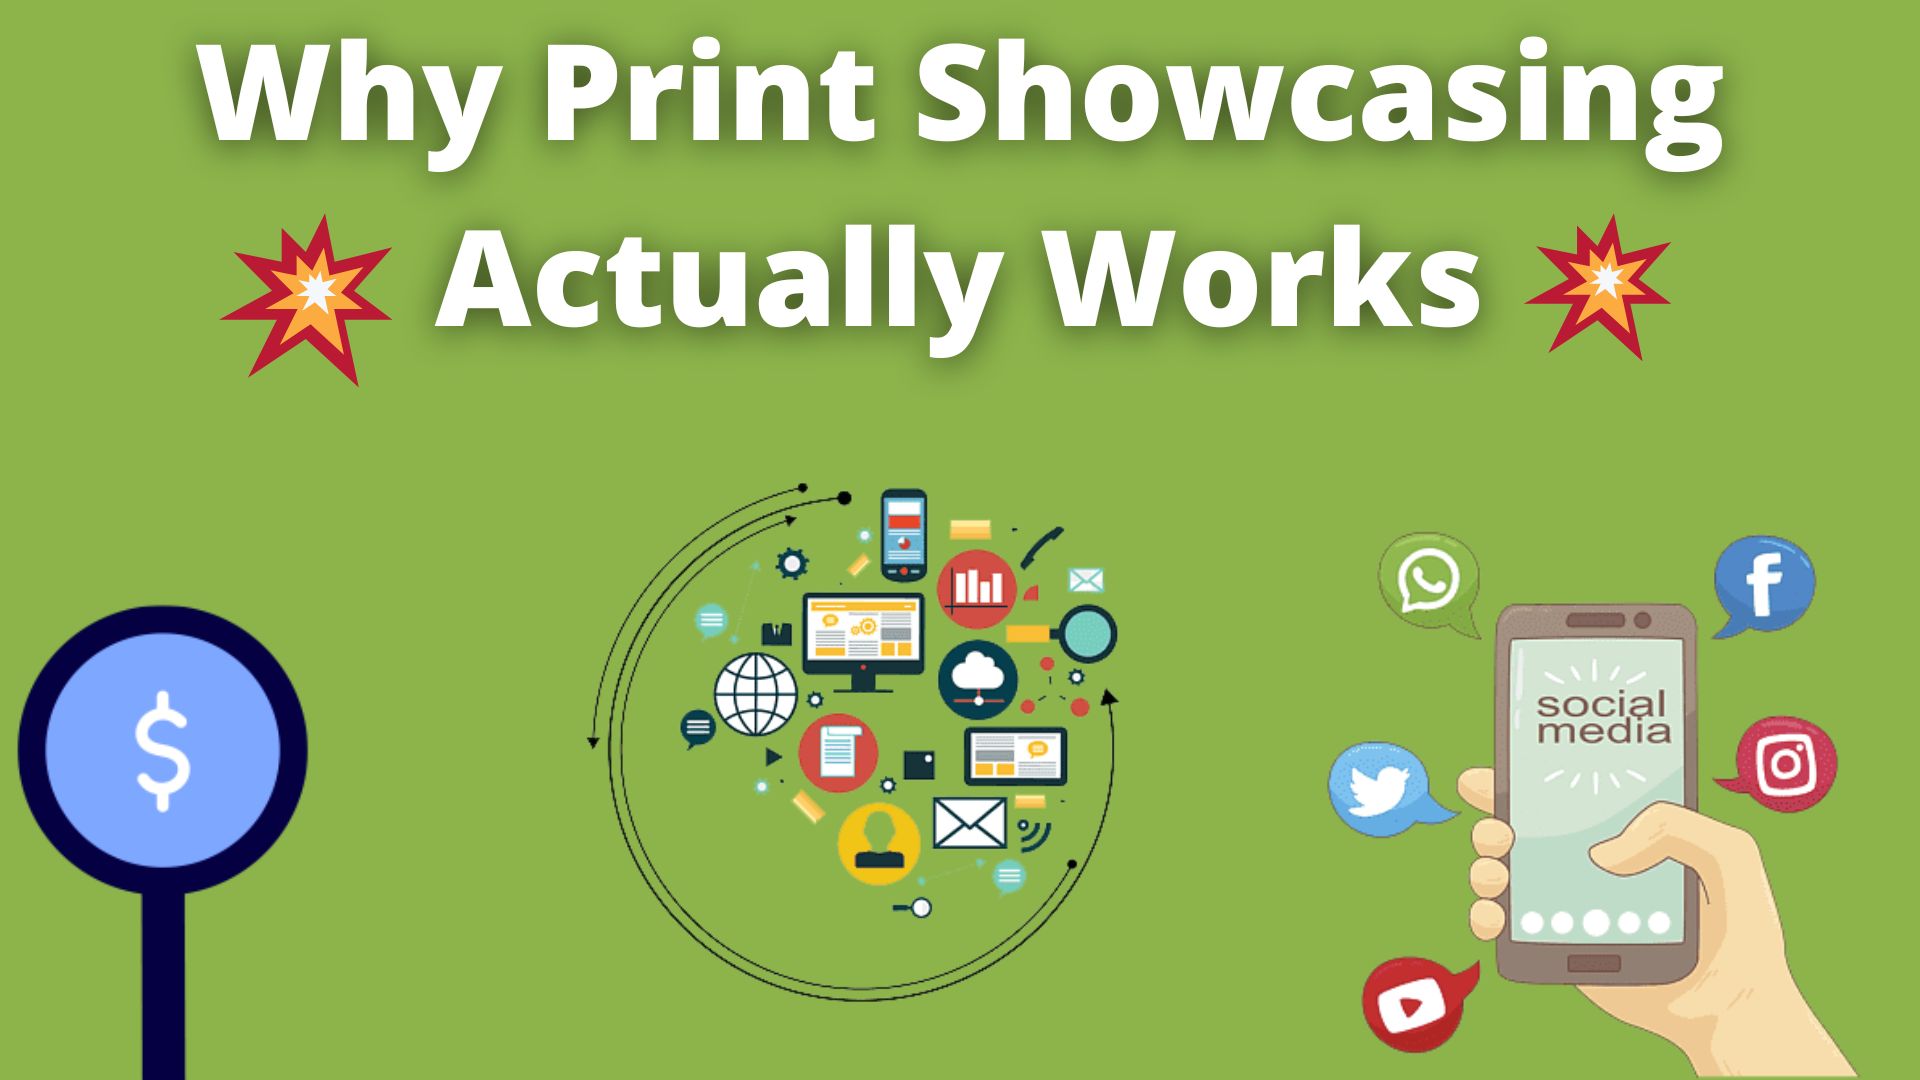 Why print showcasing actually works